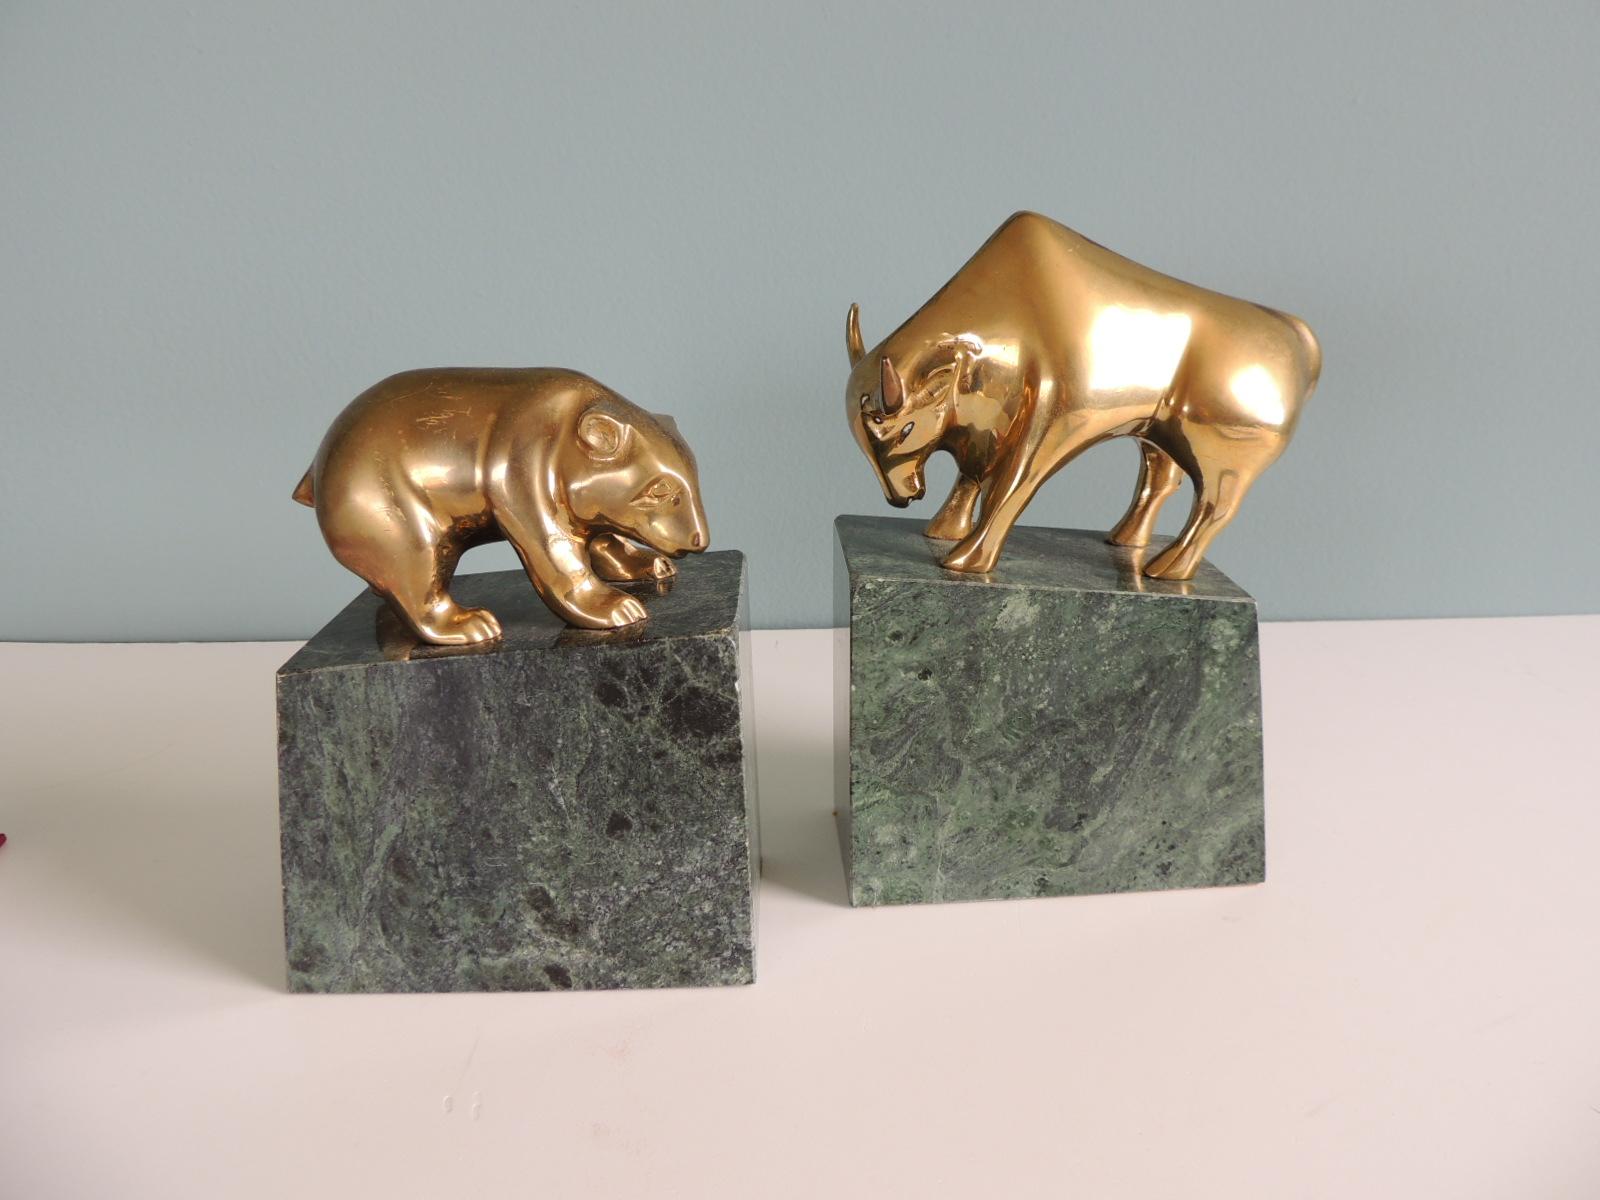 Pair of Mid-Century Modern solid brass and Marble bull and bear bookends
Sizes:
Bear: 5